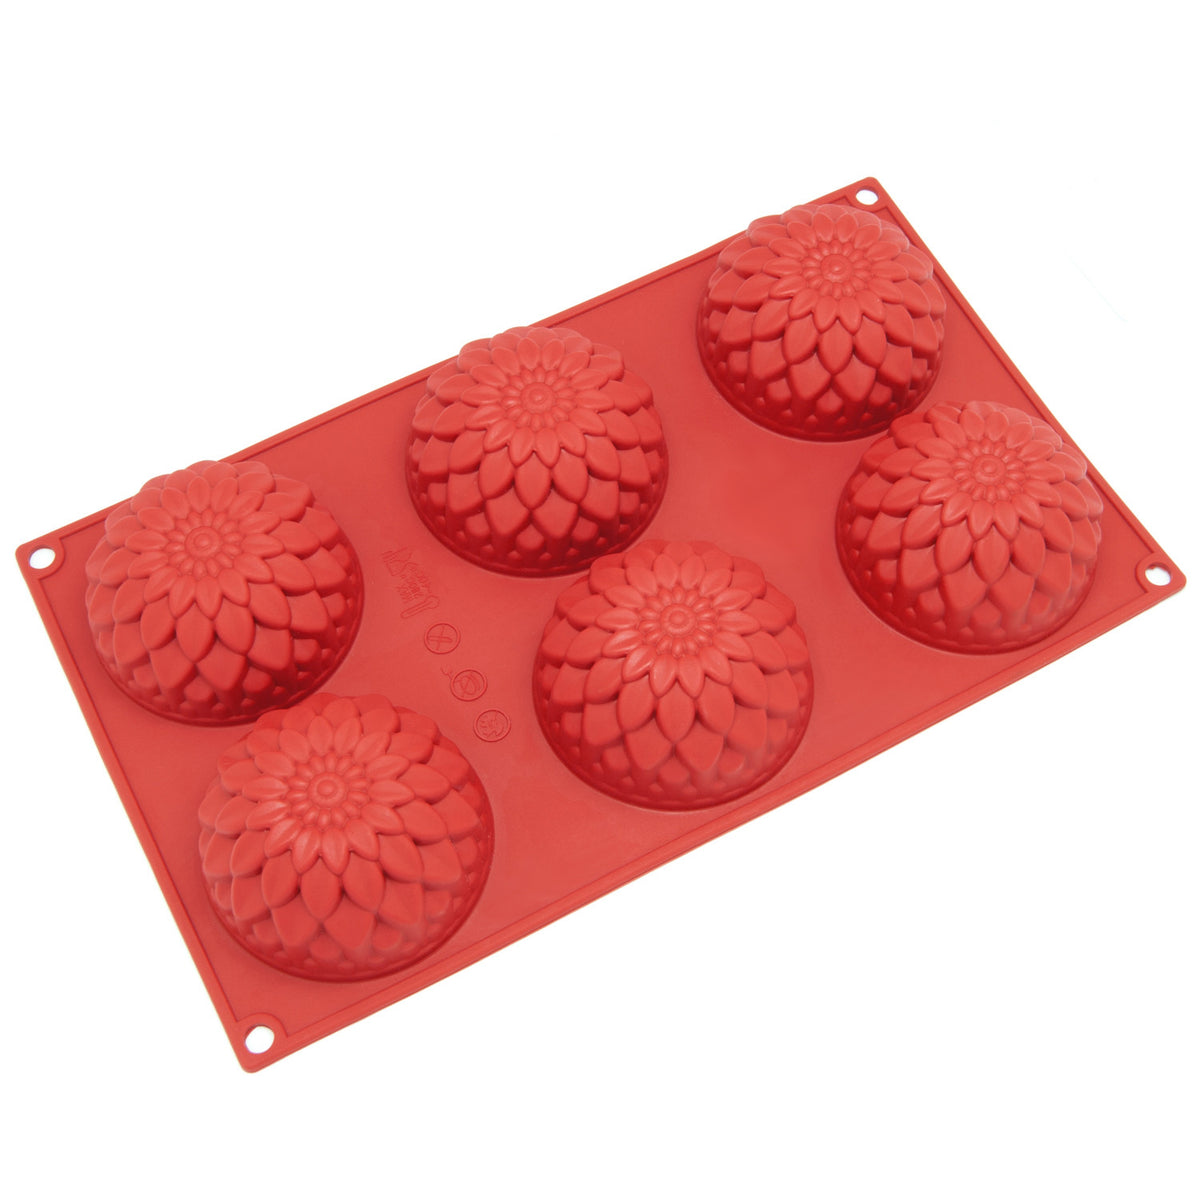  Moldfun 6 Holes Christmas Snowflakes Silicone Mold Tray for  Handmade DIY Muffin Chocolate Candy Gummy Ice Cube Jello Jelly Cupcake  Bakeware Baking Cake Soap Kitchen Pastry Decoration Moulds Tools : Home